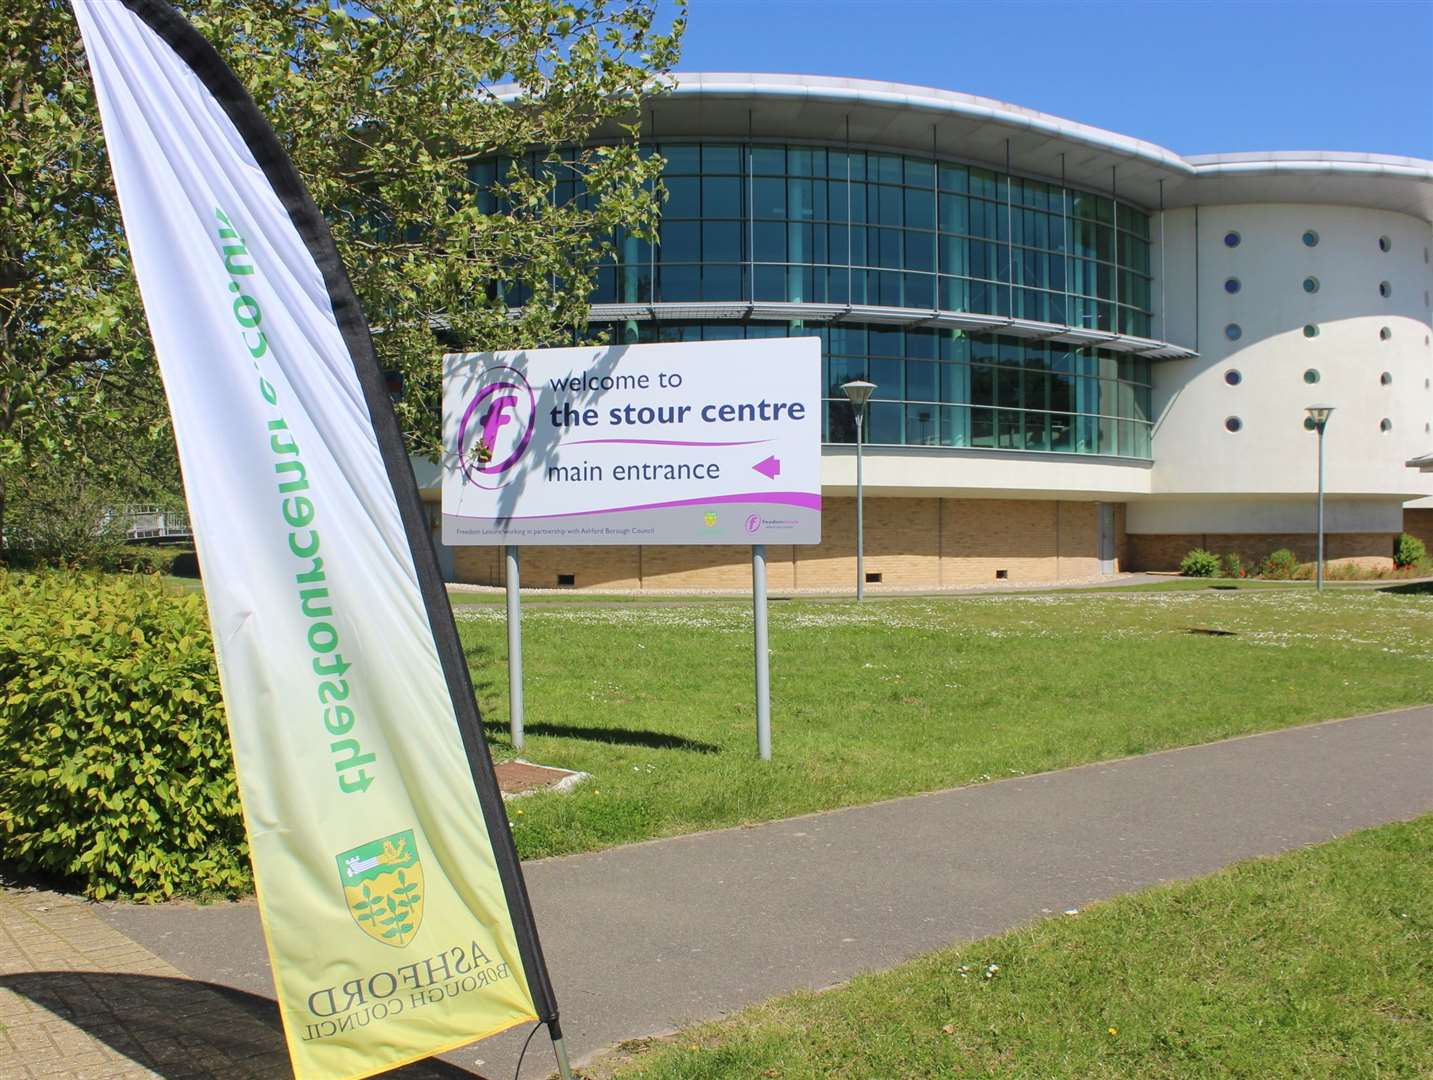 Freedom Leisure is operating the site on behalf of Ashford Borough Council